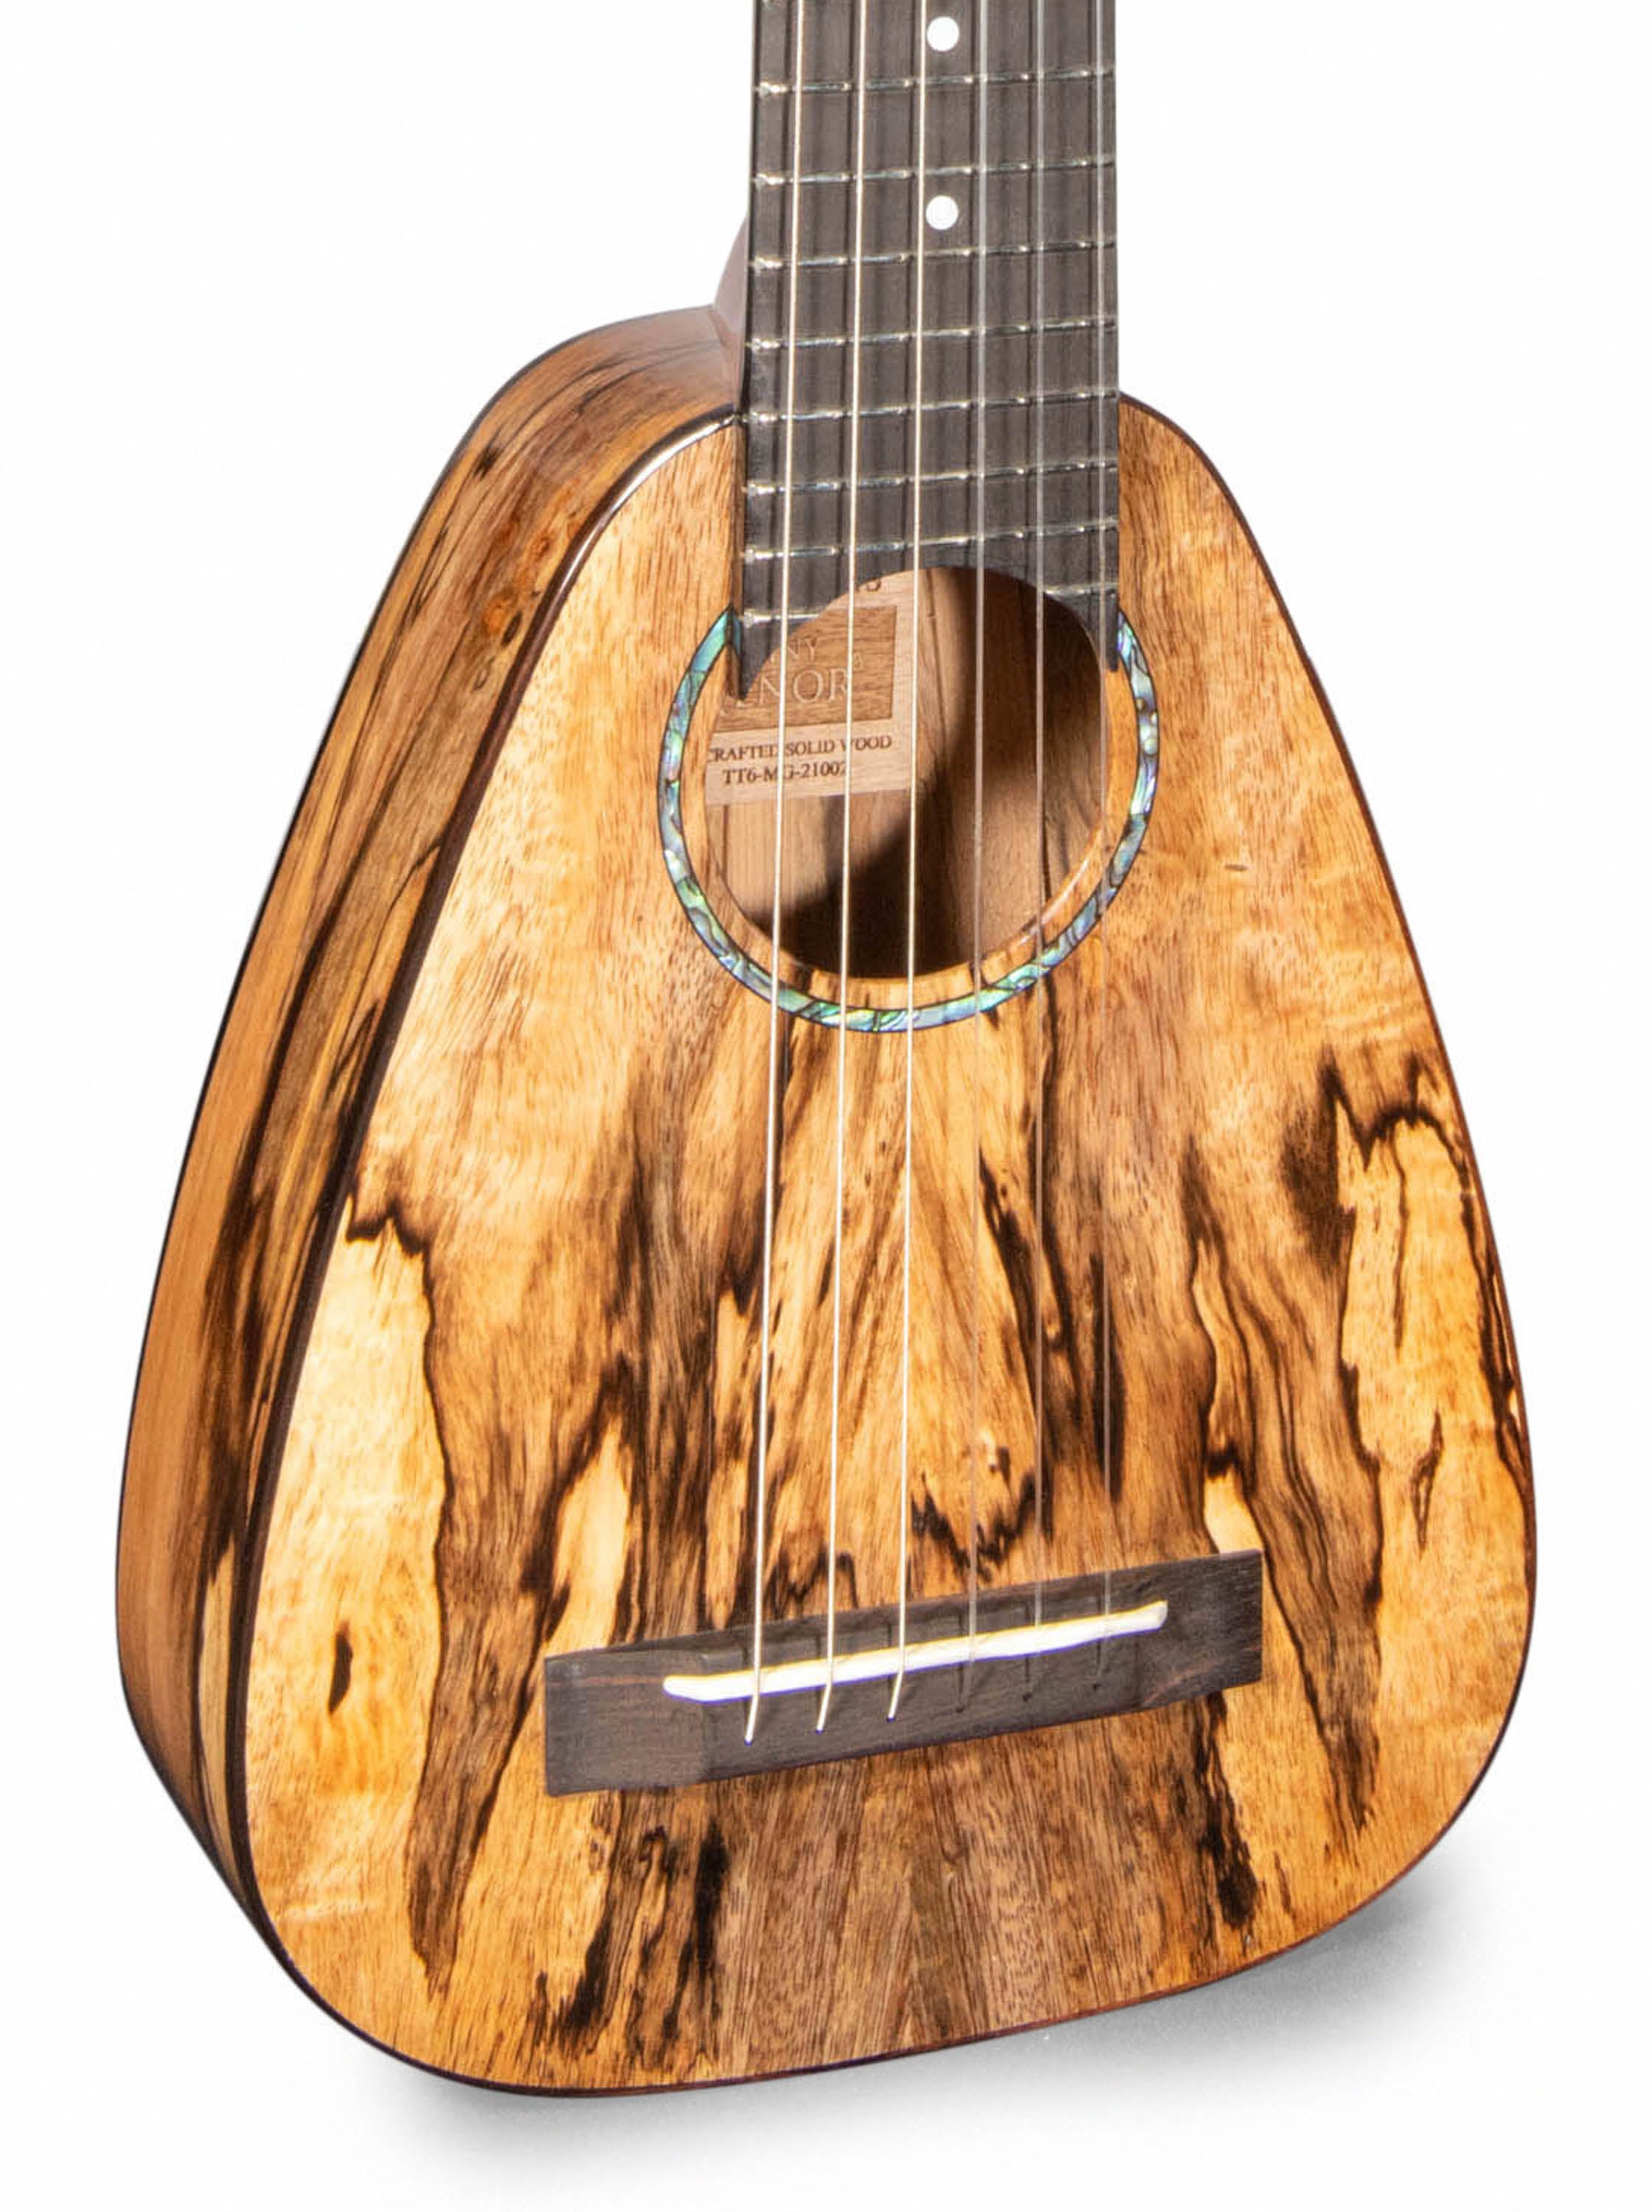 Romero Creations RC-TT6-MG 6 String Guilele Spalted Mango "Irulan" Tuned A to A